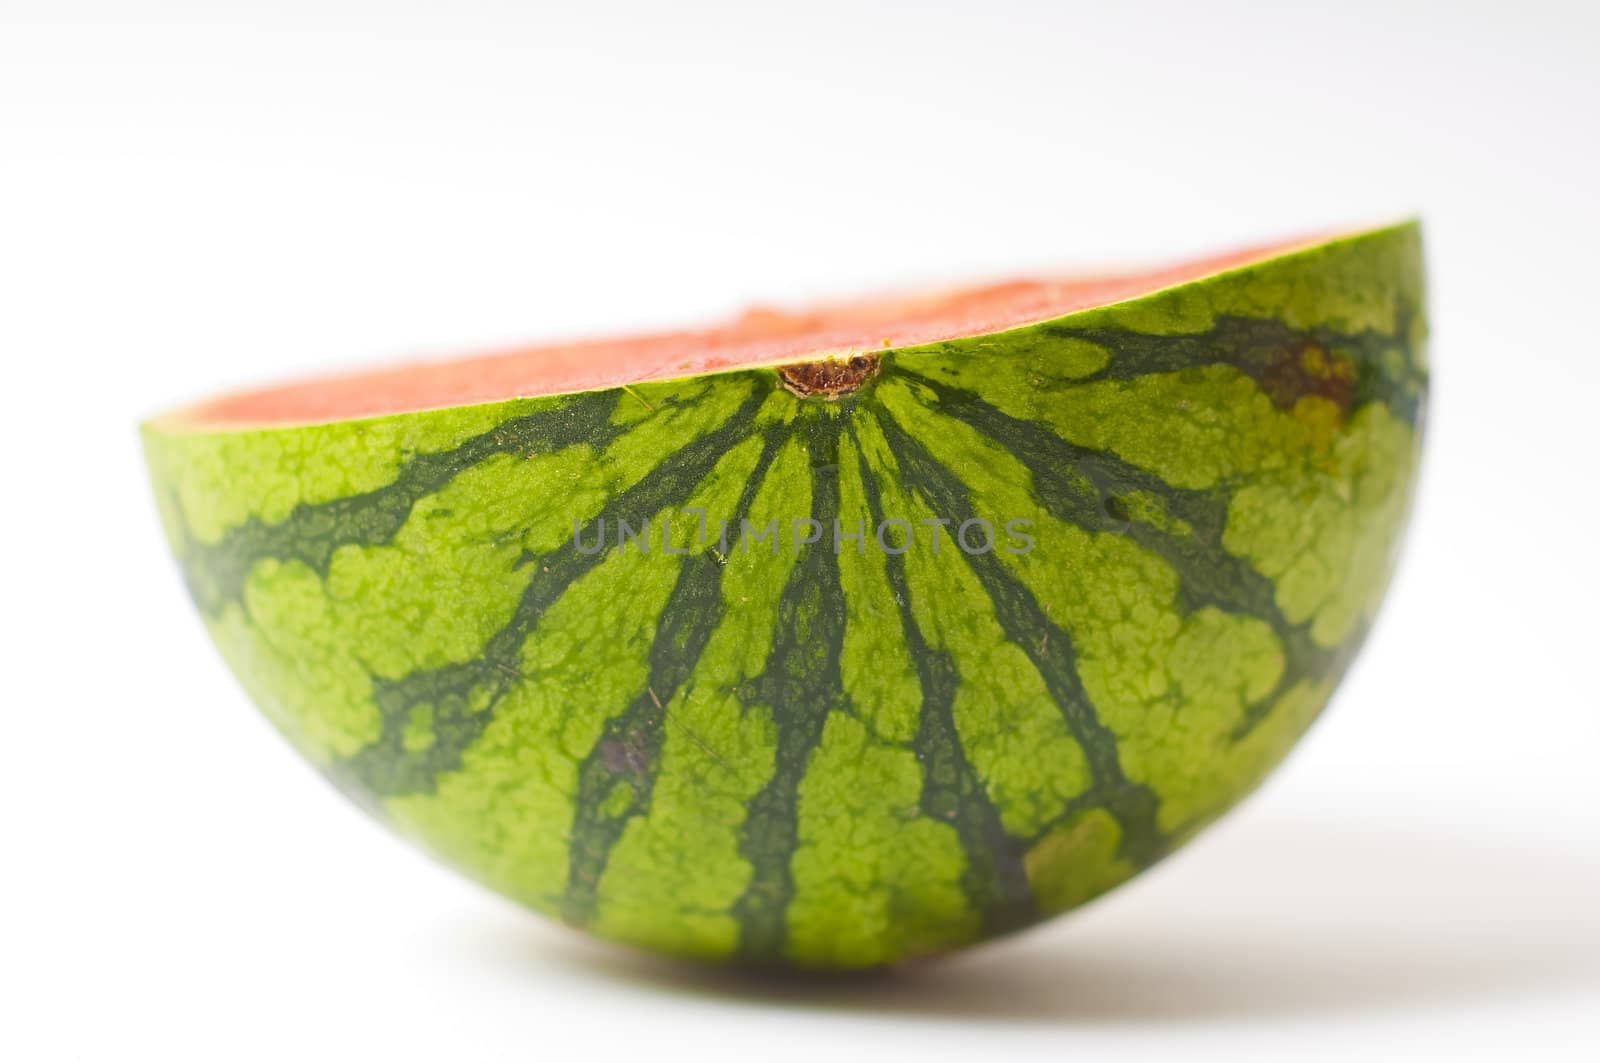 slices of watermelon on a plate and a white background